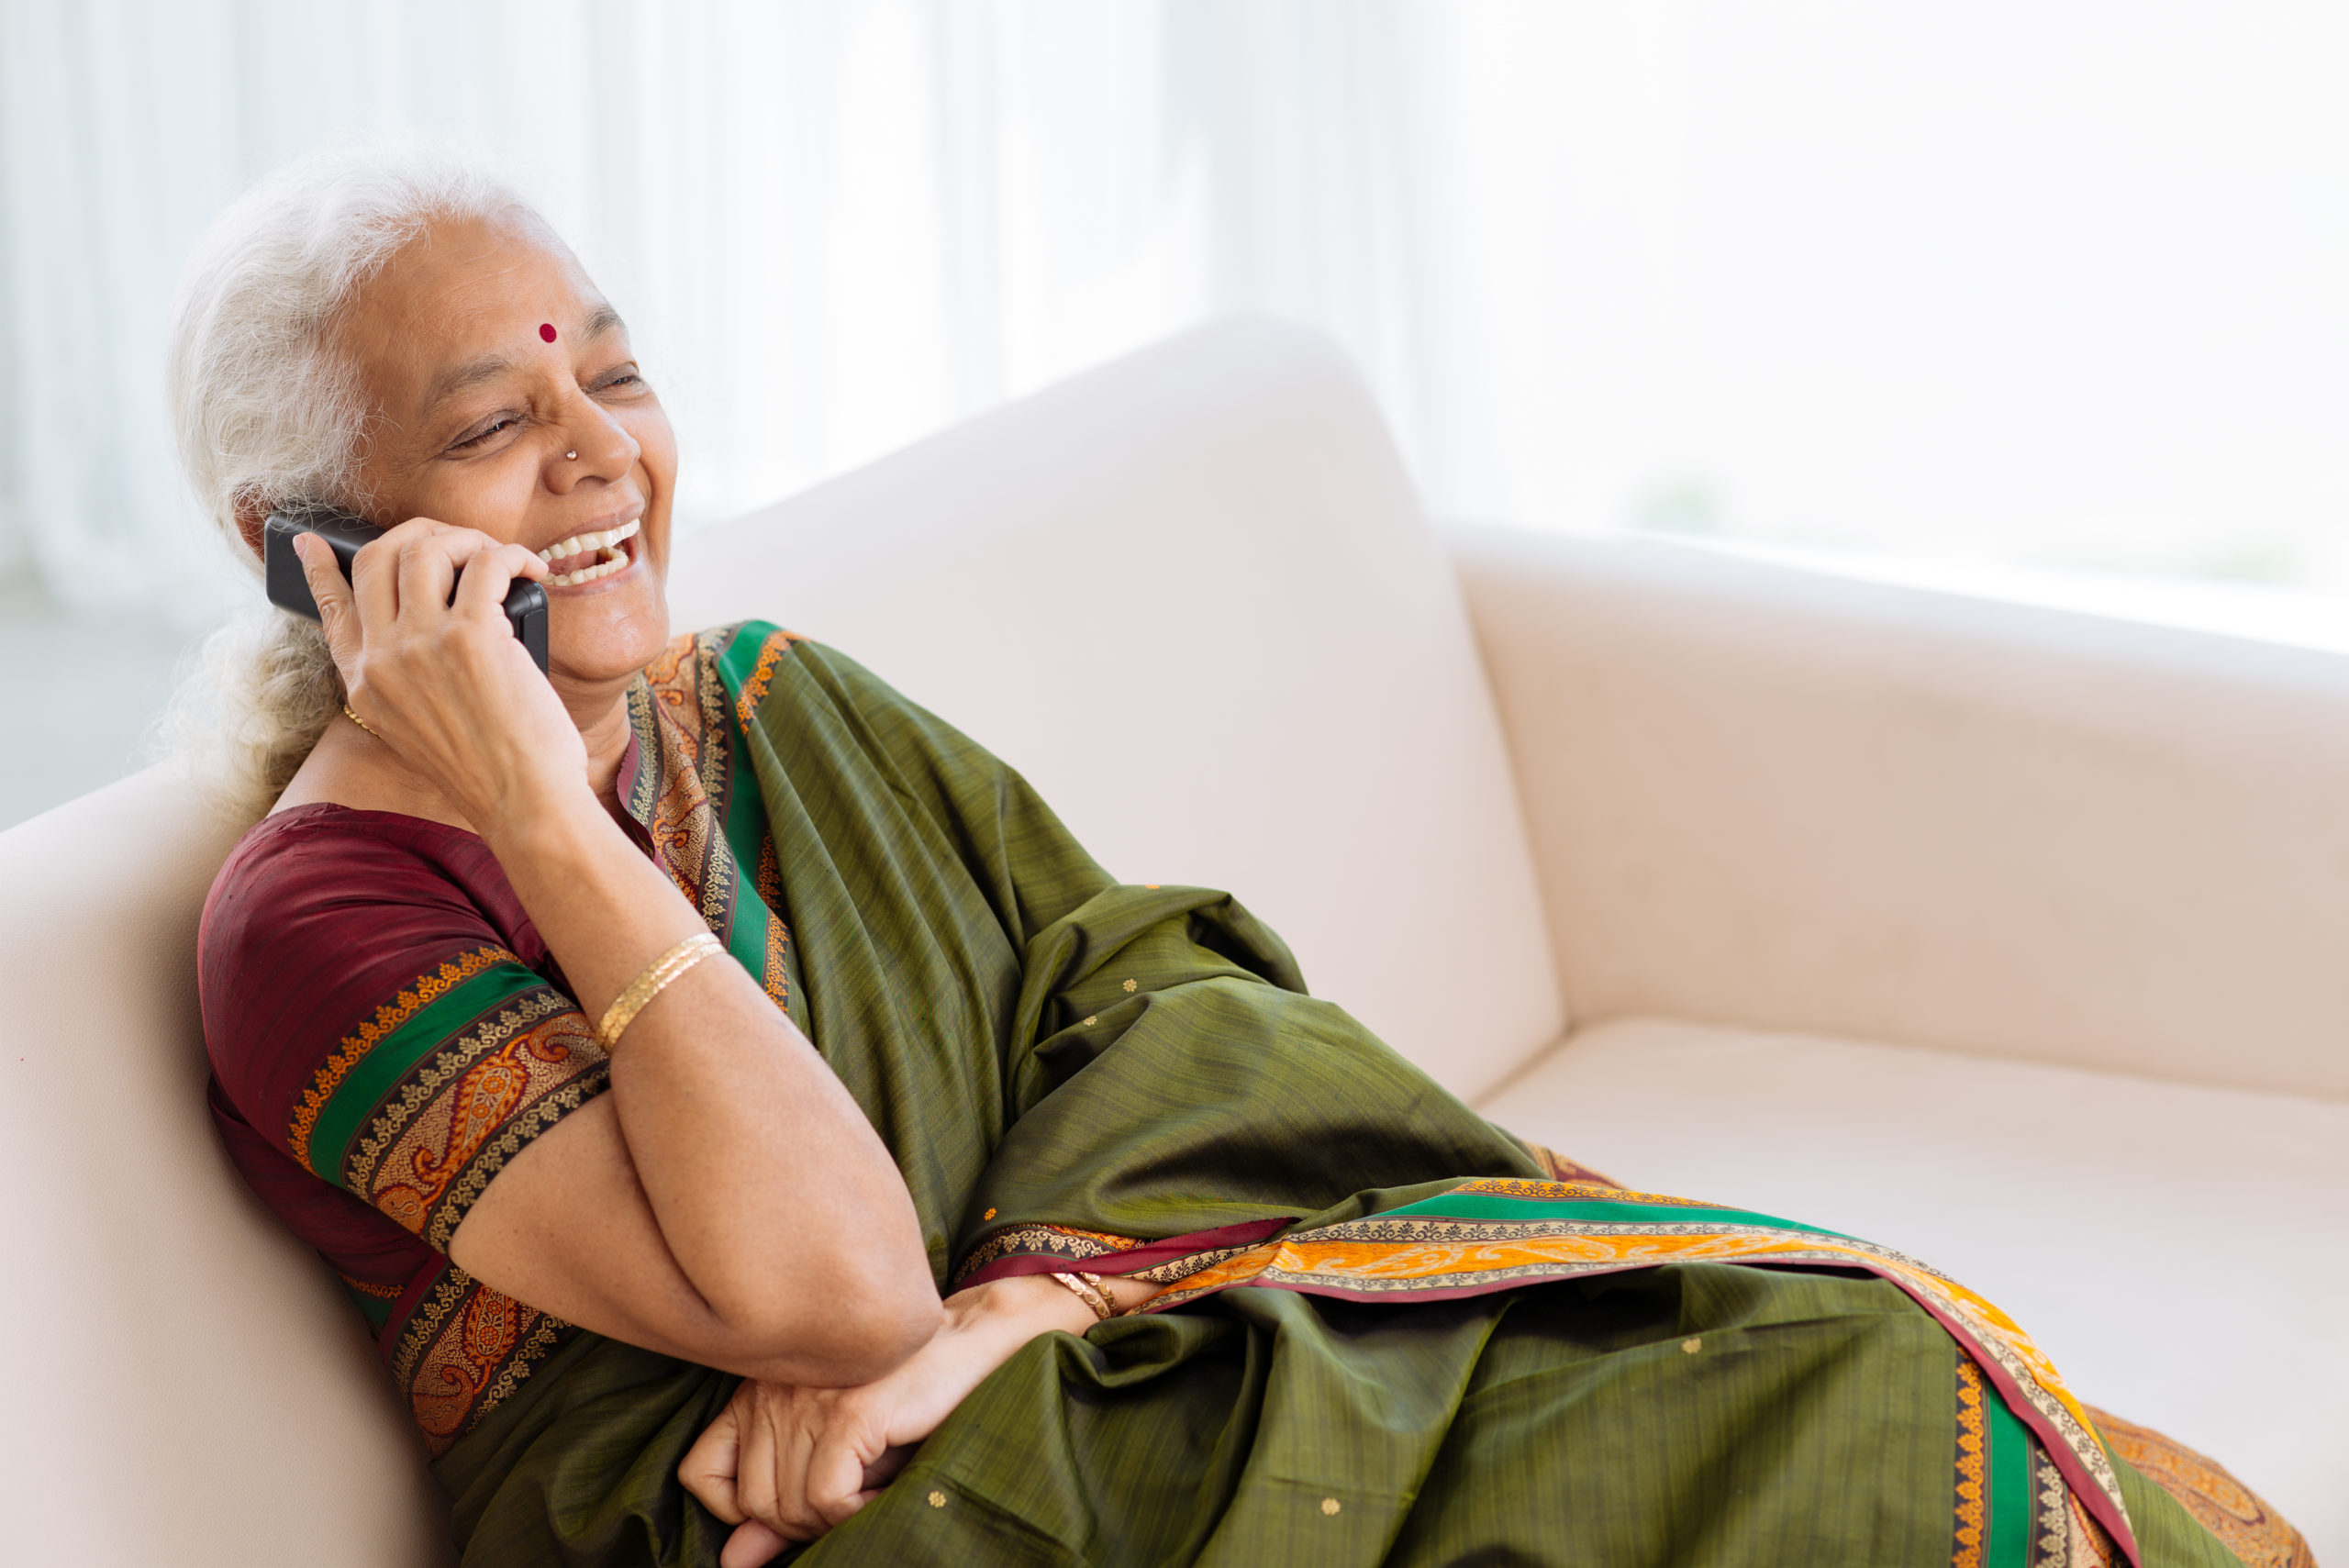 Laughing Indian woman with a red bindi wearing a beautiful green and red decorated sari sits on a cream colored sofa and talks on the telephone. Behind her there are white shades and light shining through.